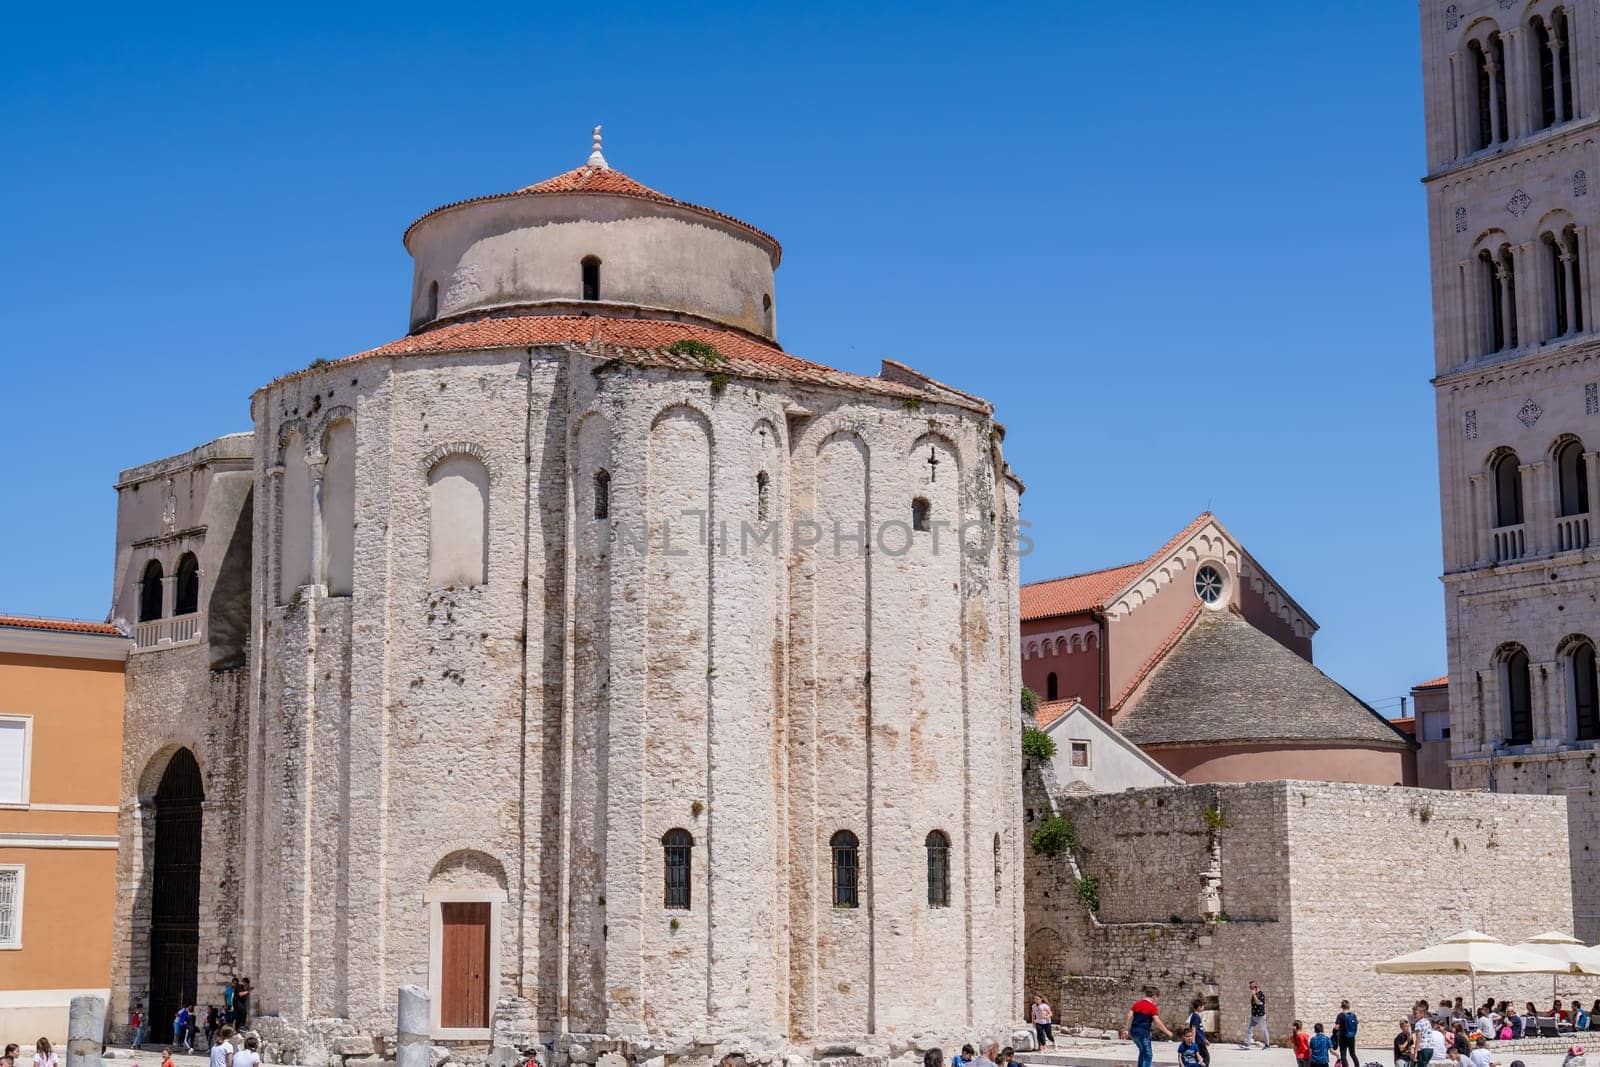 Charming old town of Zadar, Croatia, with historic architecture and rich cultural heritage, ideal for travelers seeking to immerse themselves in local traditions.